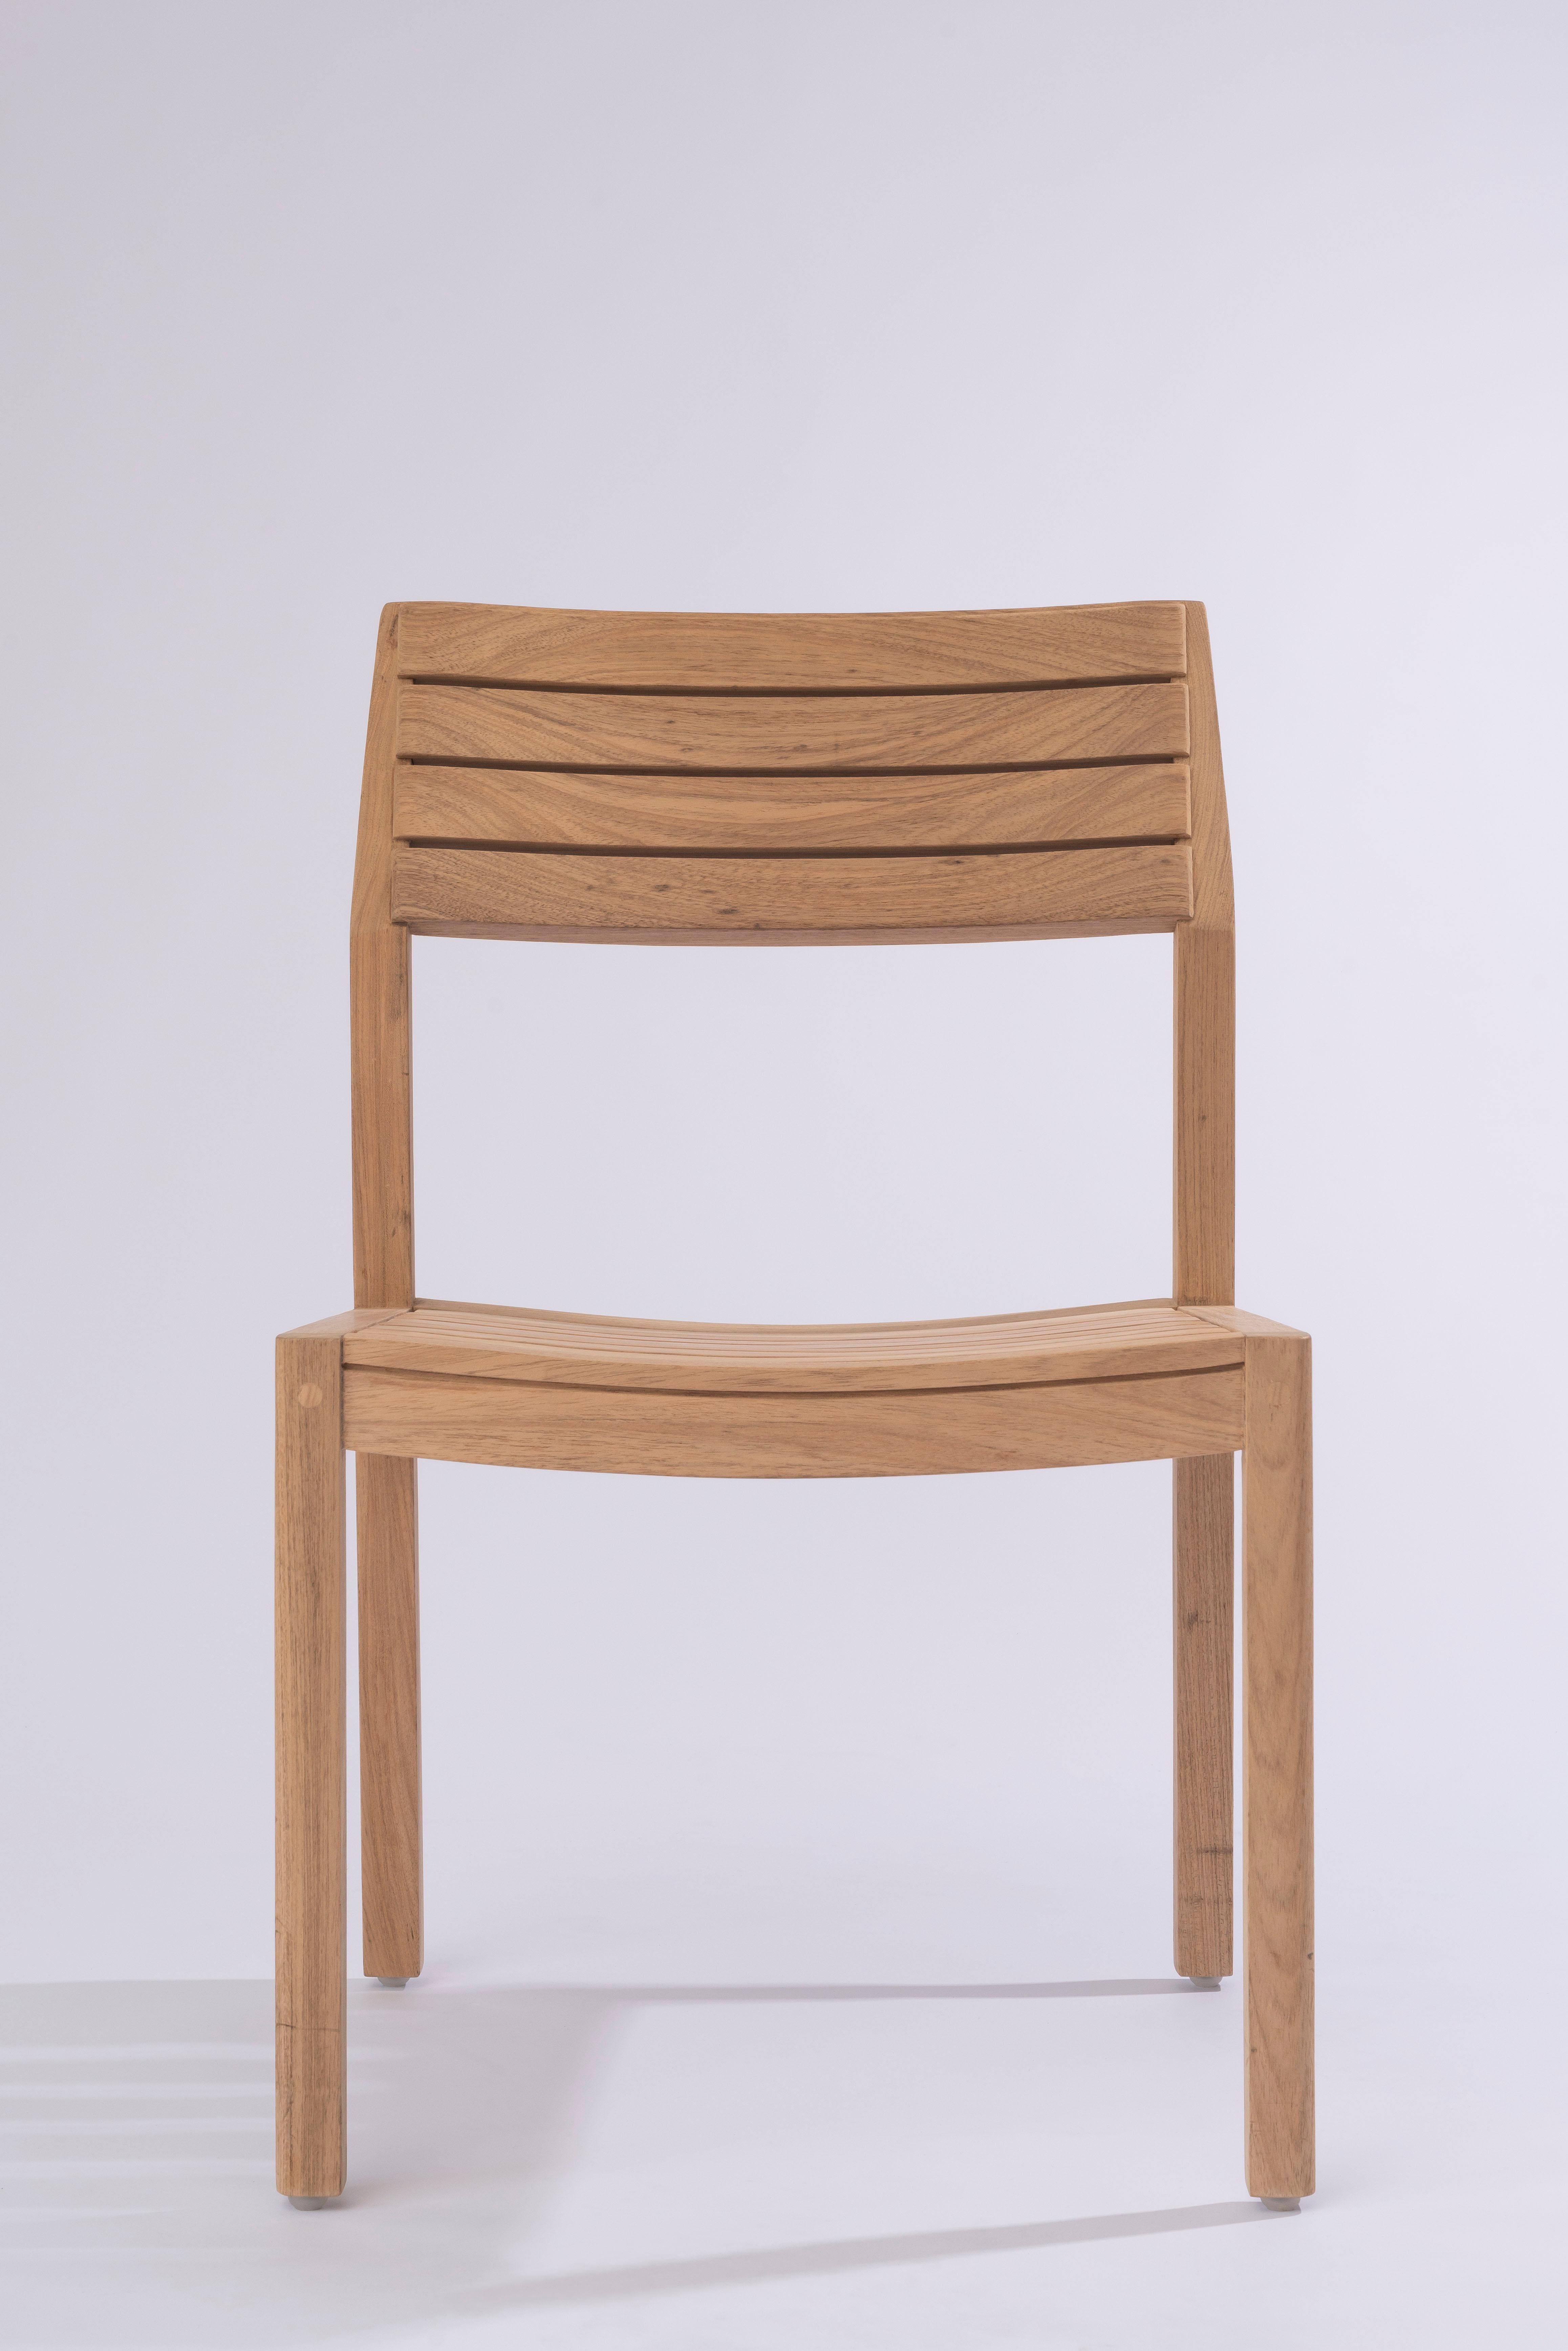 Solid Wood Arms Chair with Wooden Slats, for the Outside, Outdoor Resistant For Sale 1